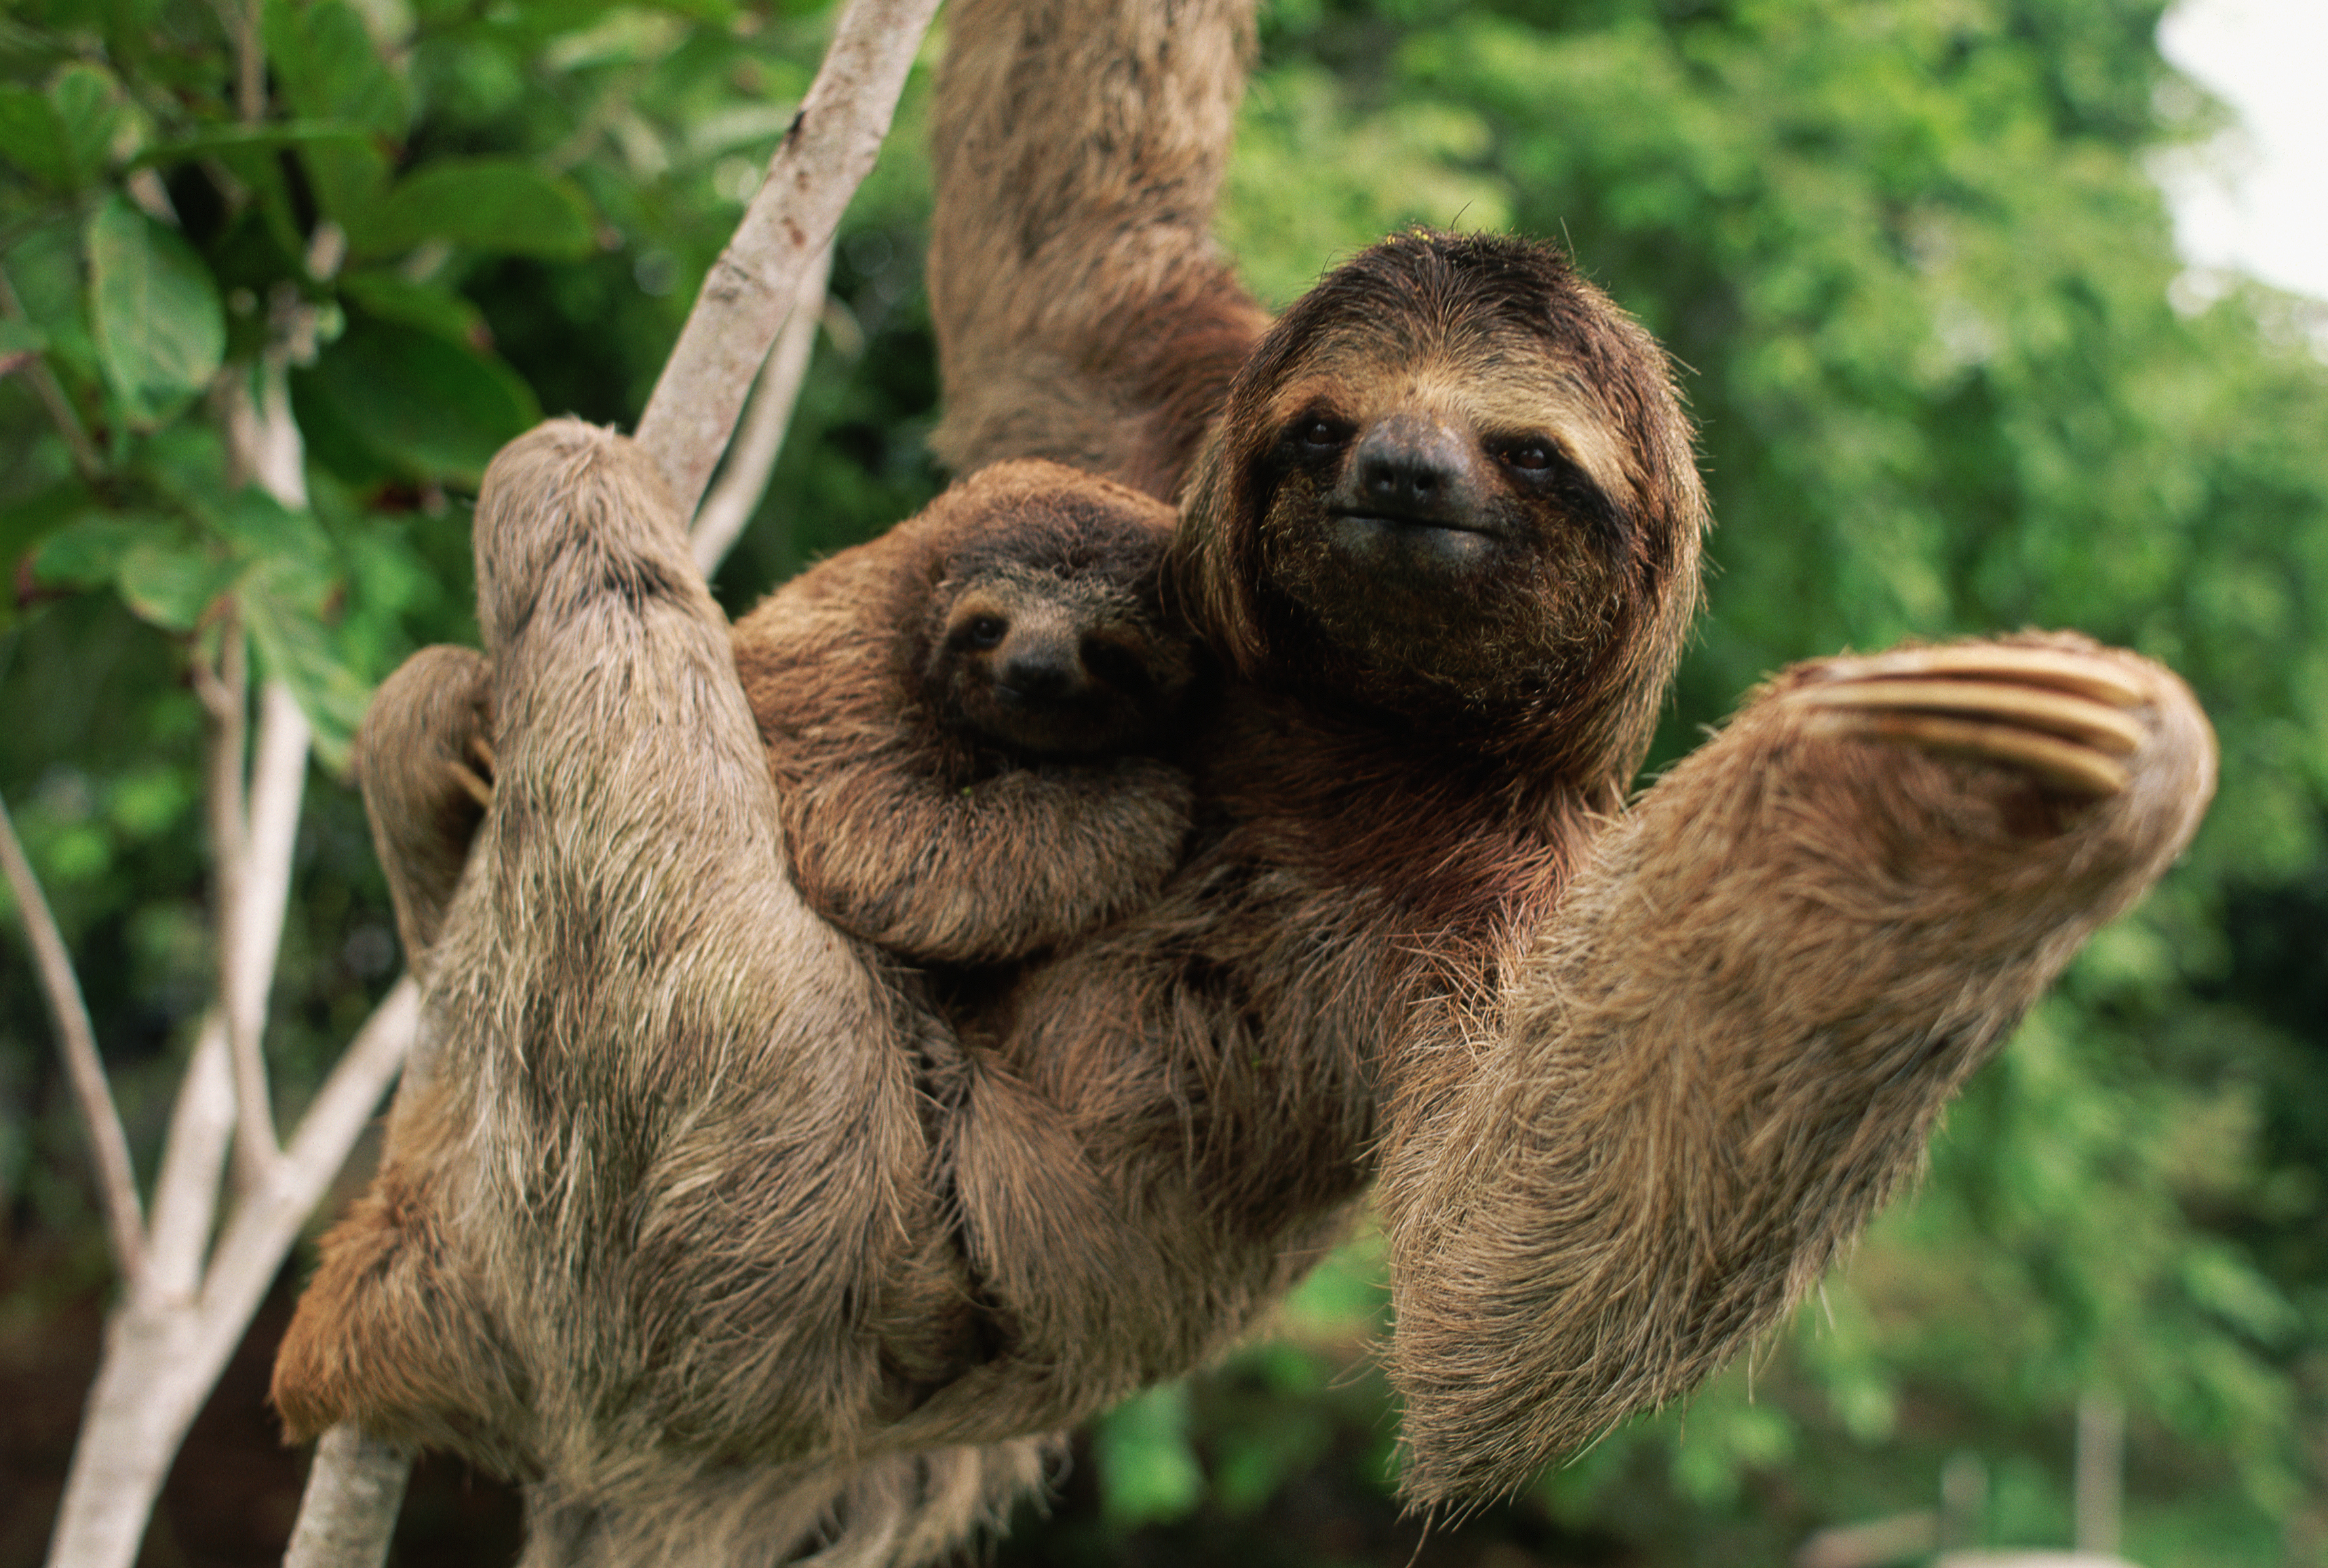 A sloth hanging from a branch with its baby clinging to its chest